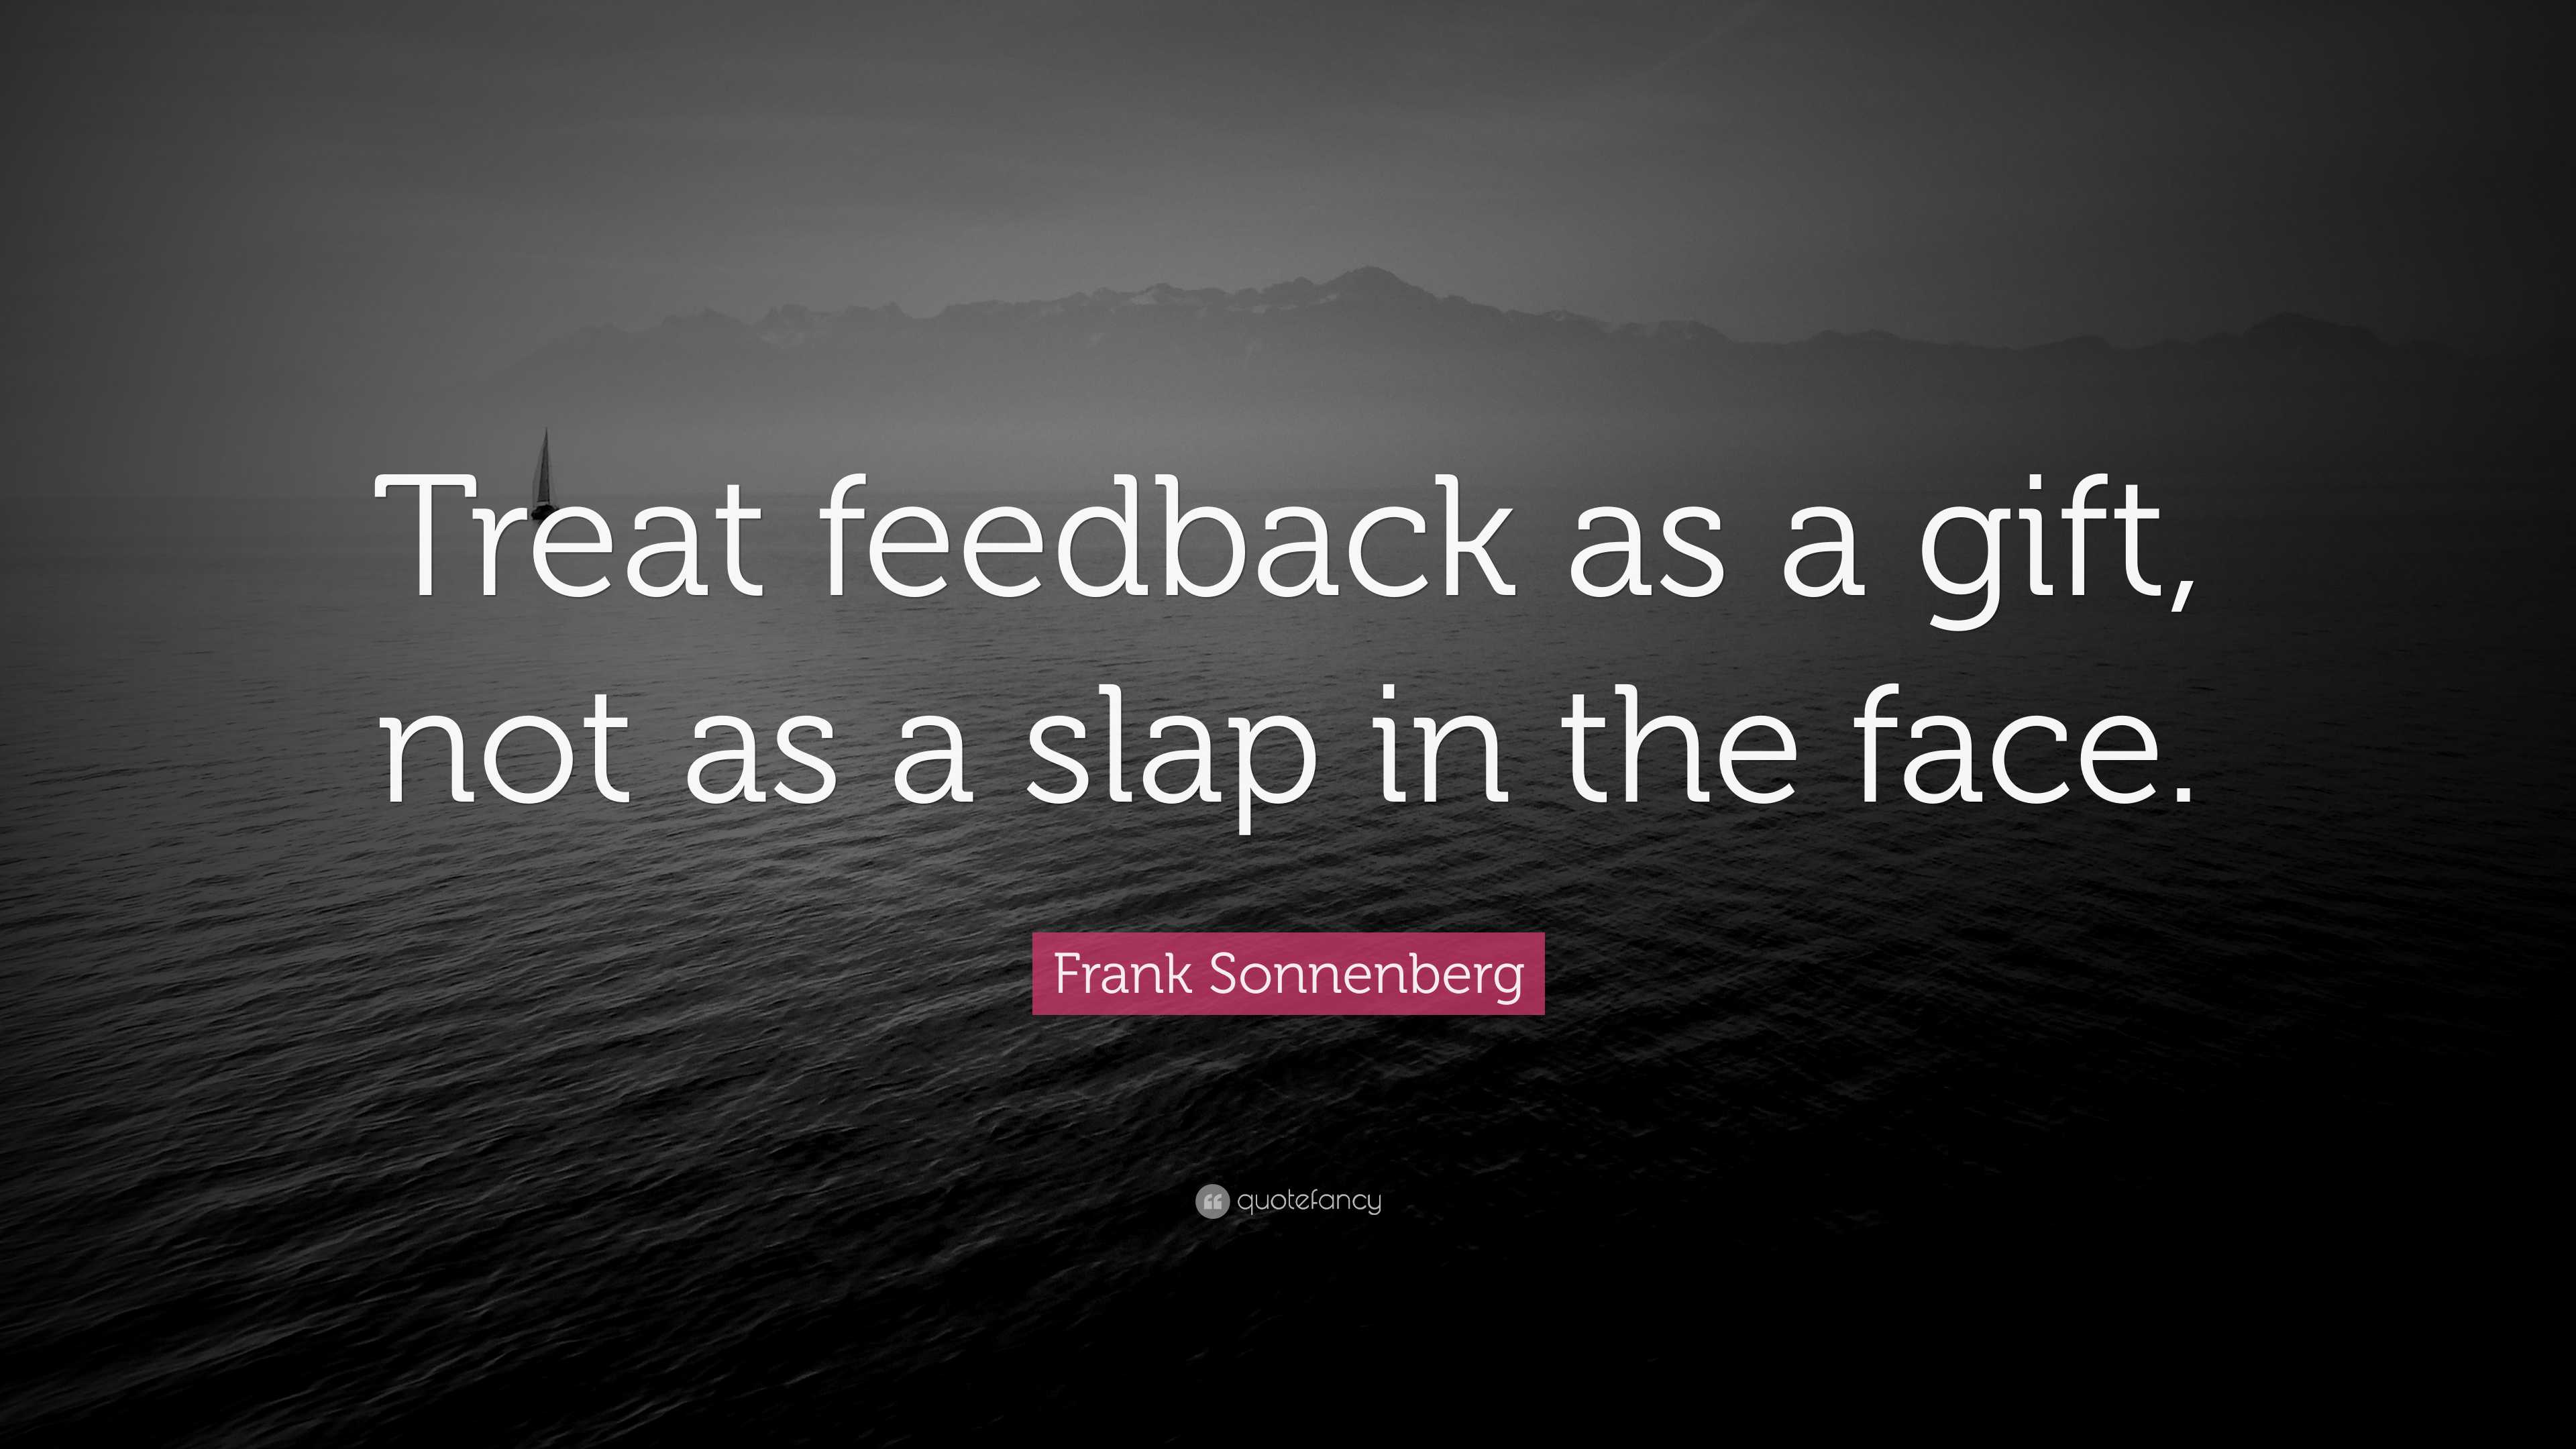 Feedback is a gift | Phil Cross - Conscious Leadership